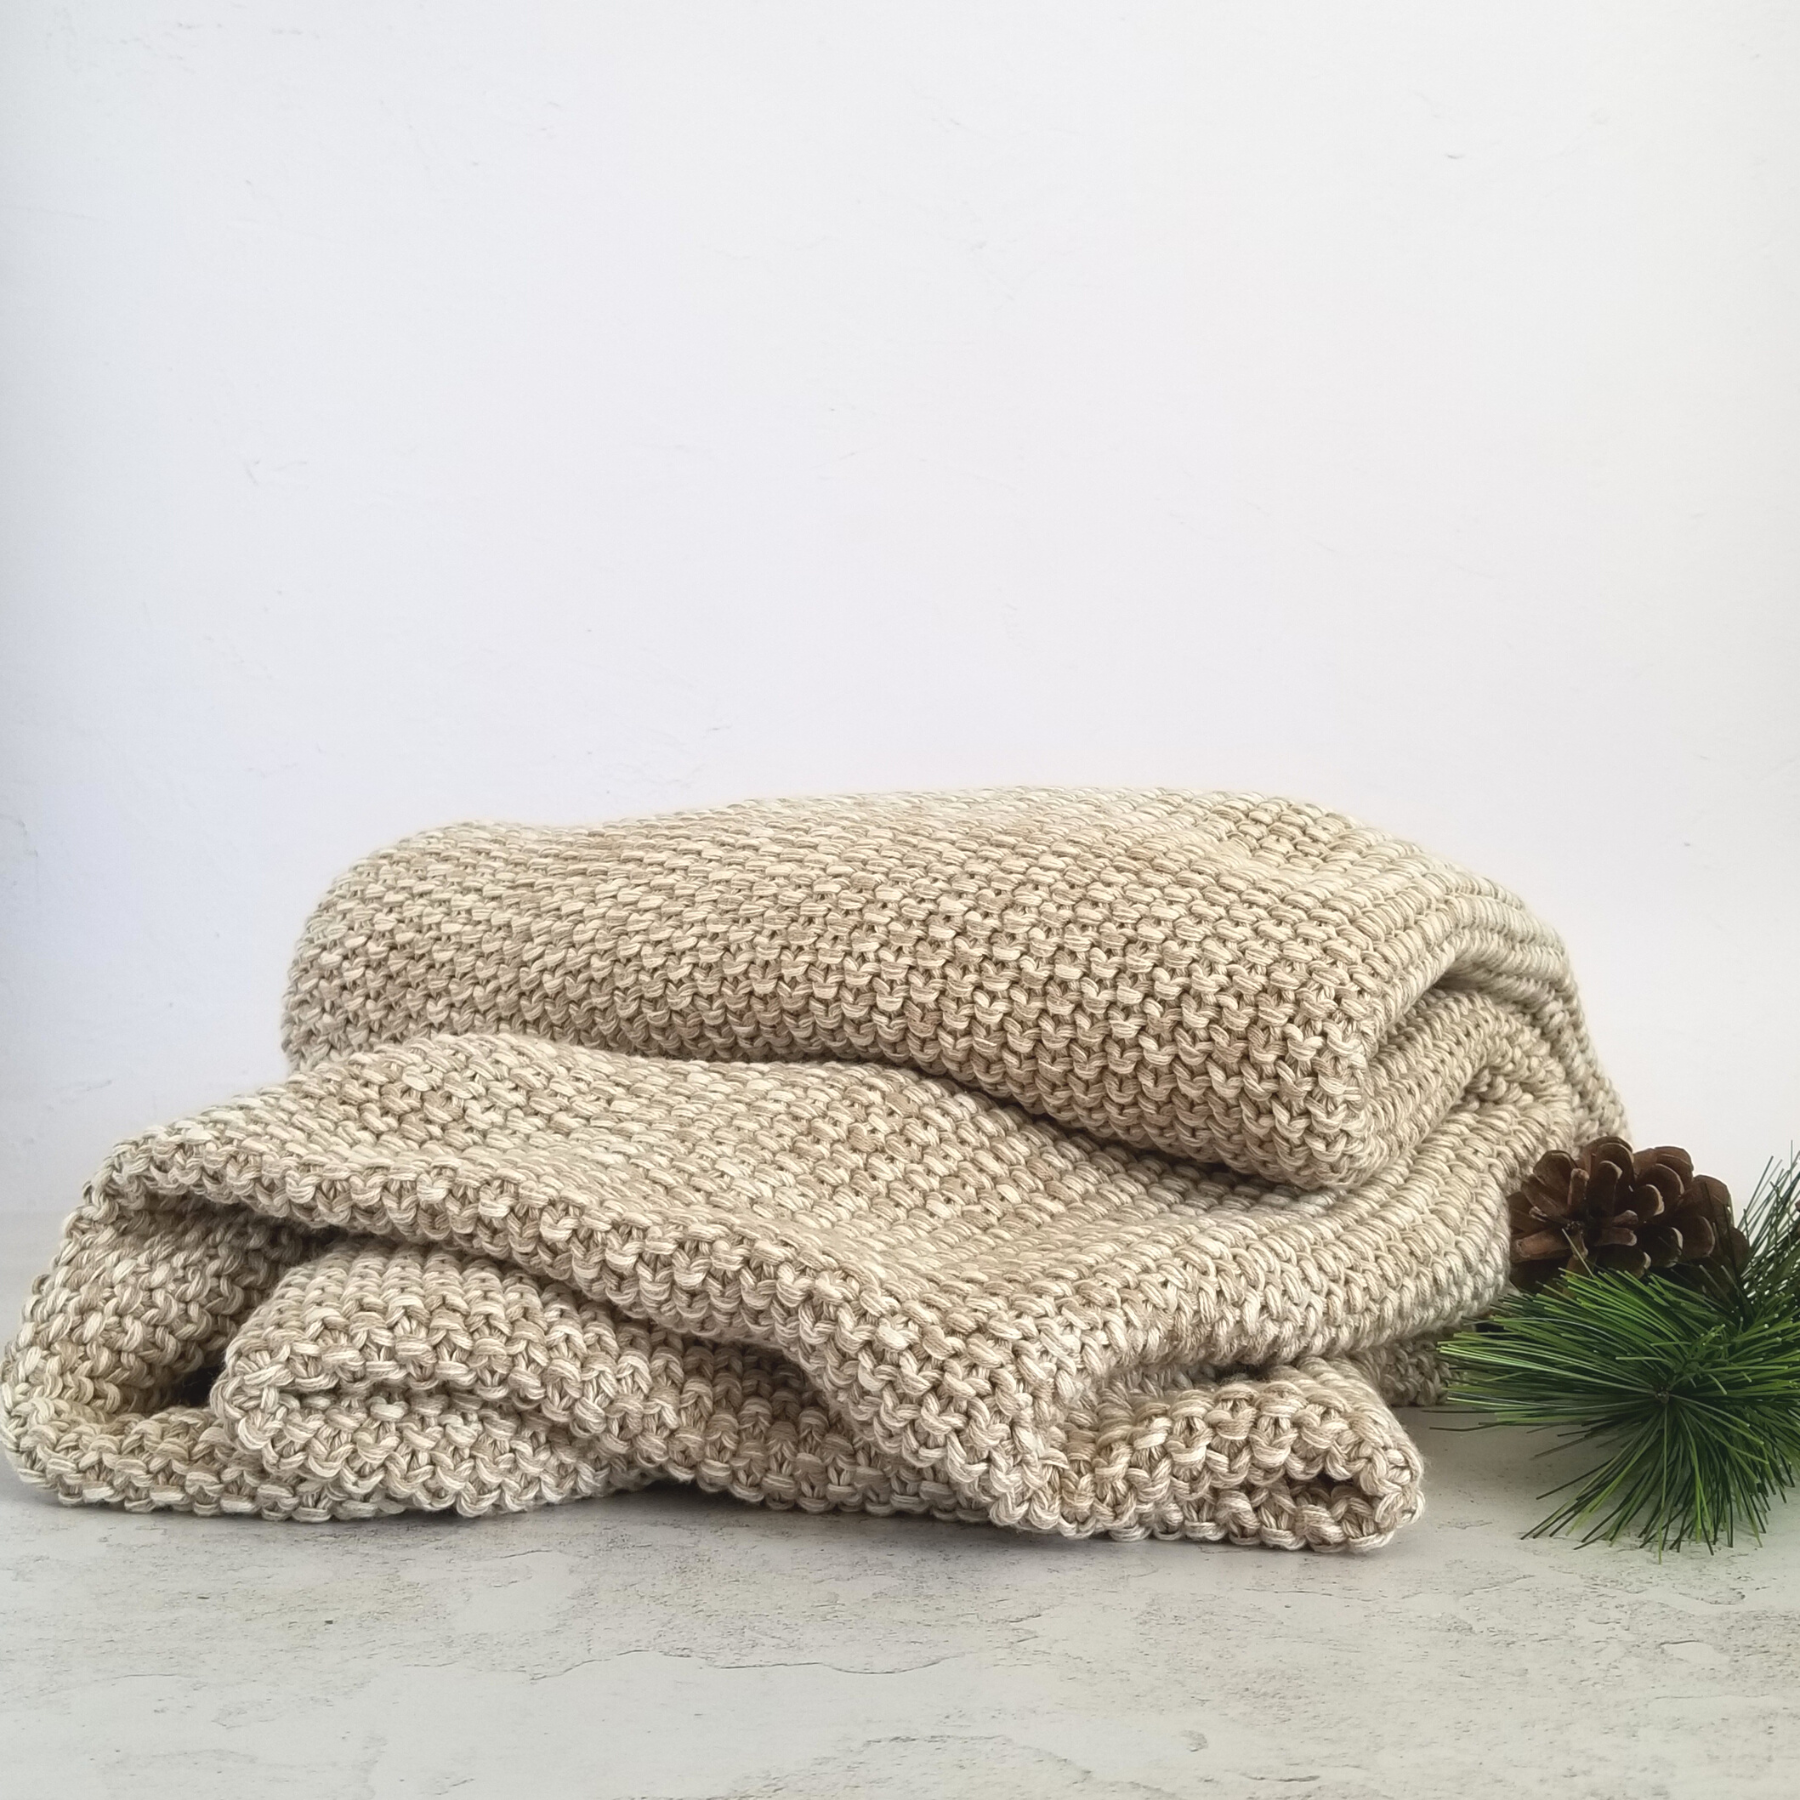 Natural Cotton Knit Throw Blanket